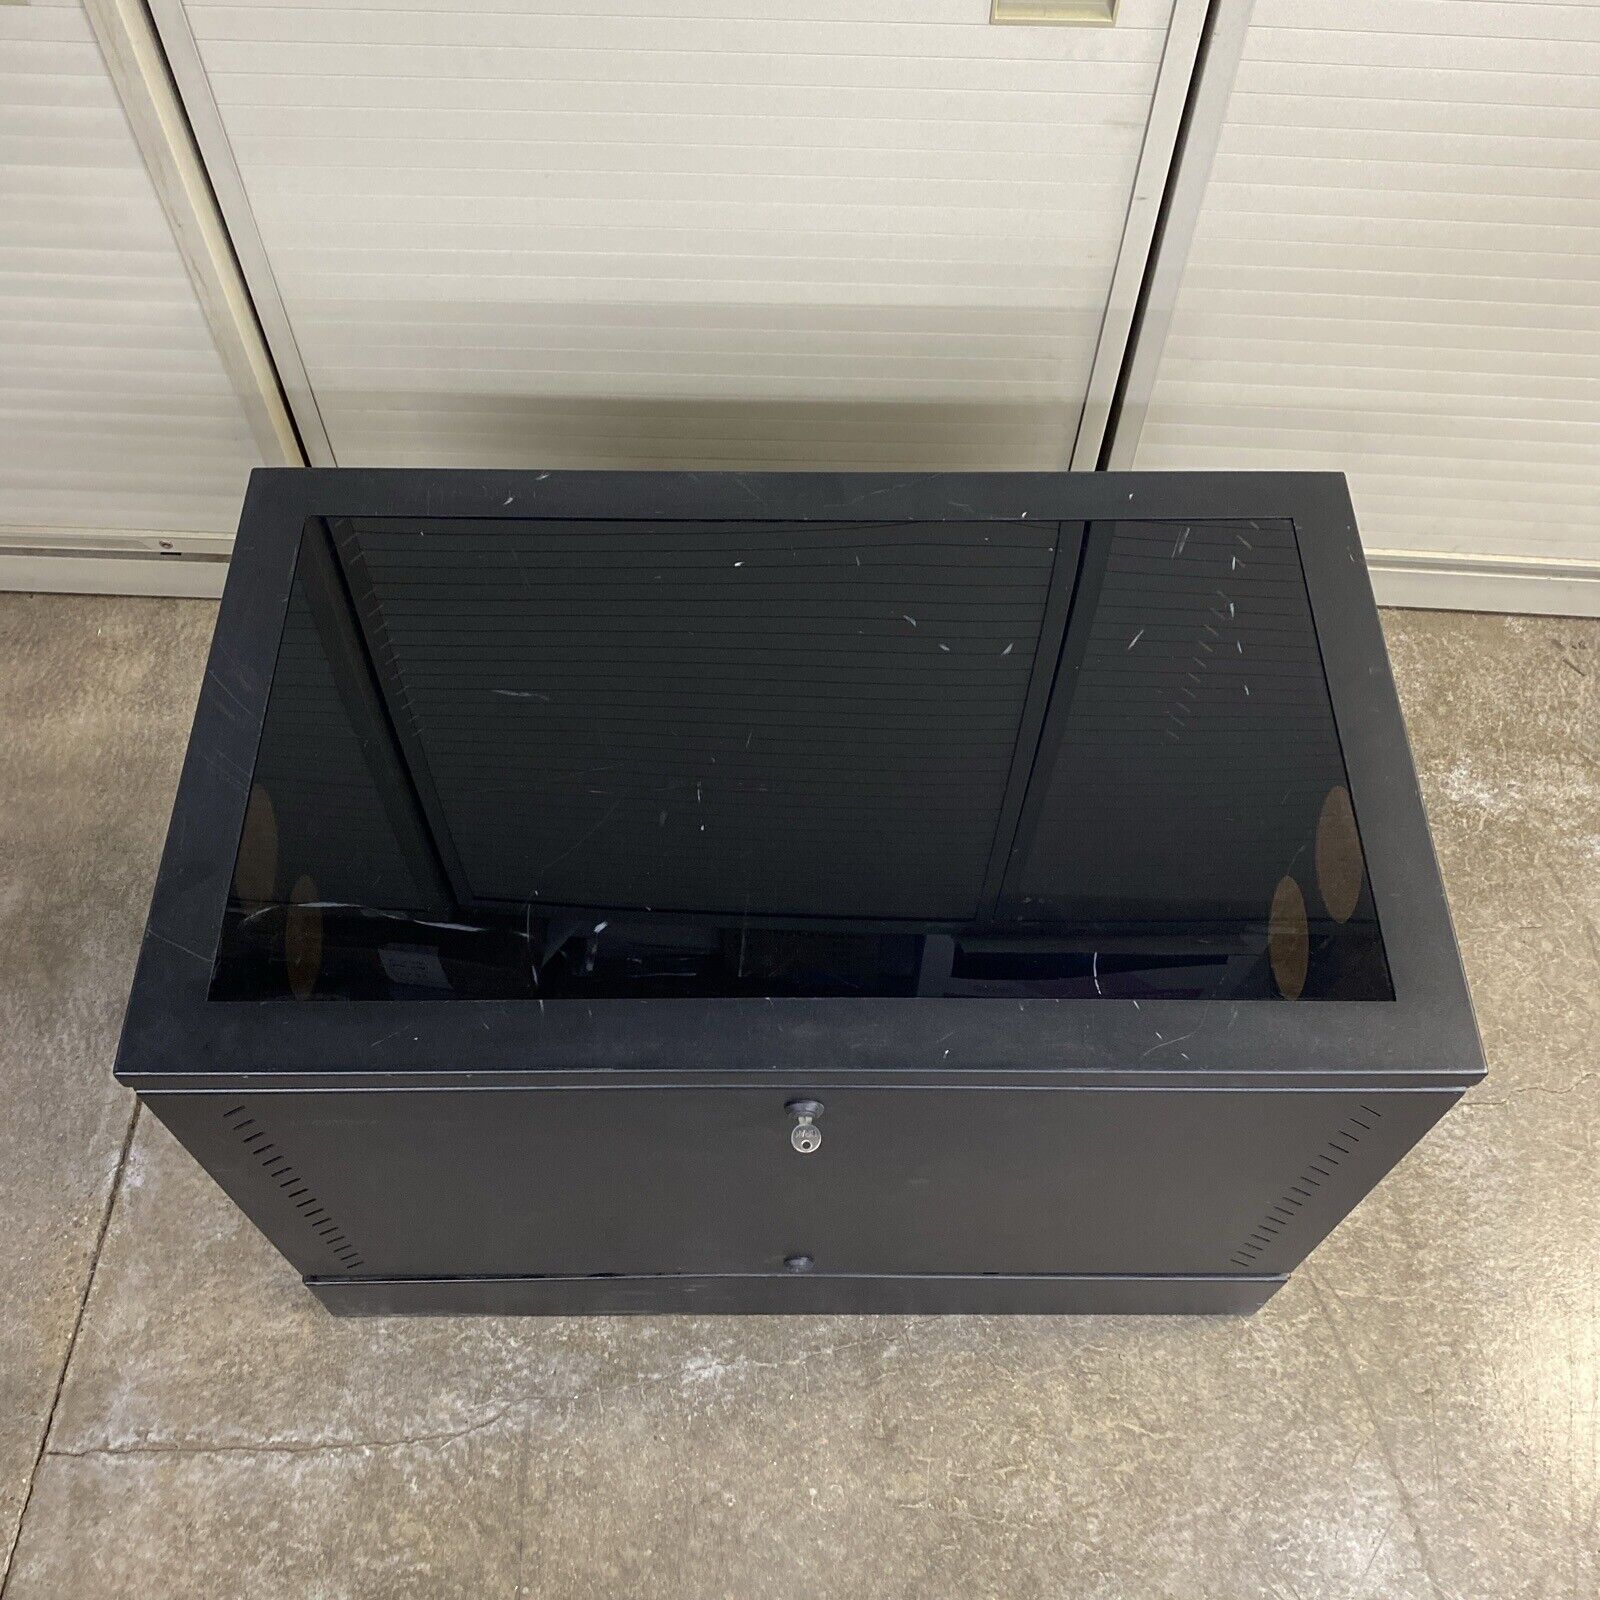 Great Lakes Tinted See-Through Short Server Rack Unit 36"x24"x21"